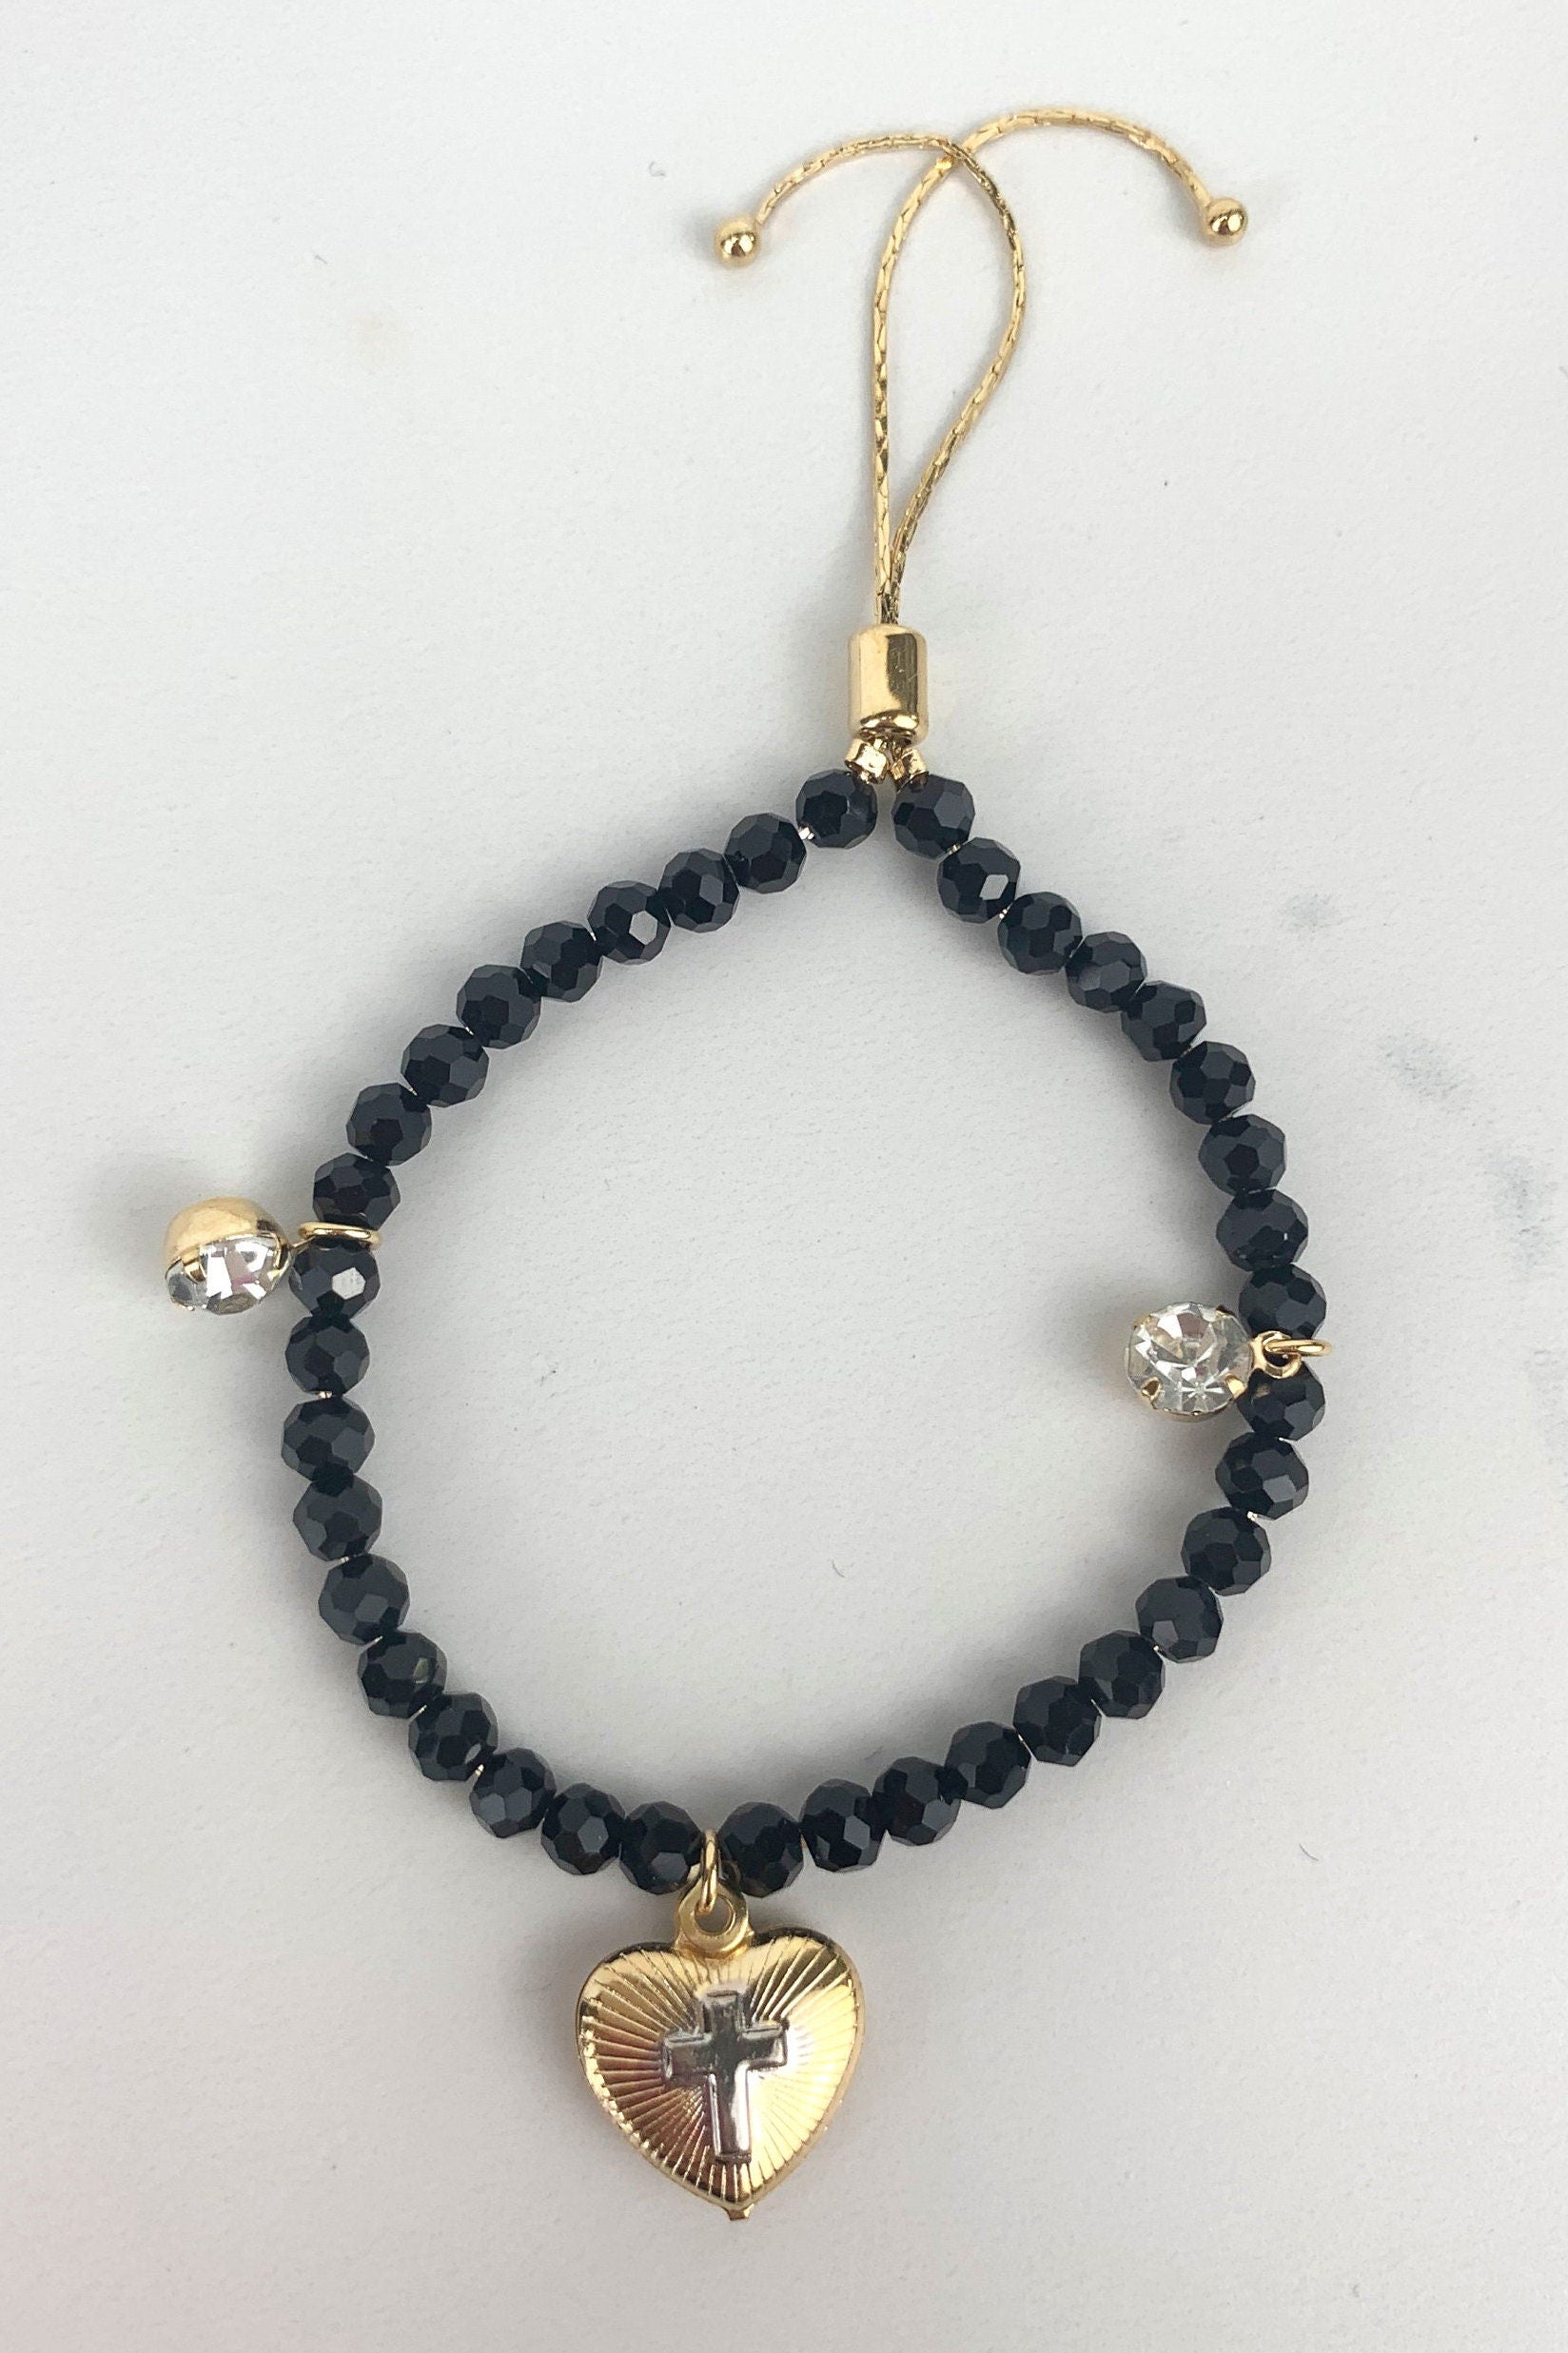 18k Gold Filled 1mm Snake Chain, Black Beads Adjustable Bracelet with Elephants, Cross or Dove Charms Wholesale Jewelry Supplies